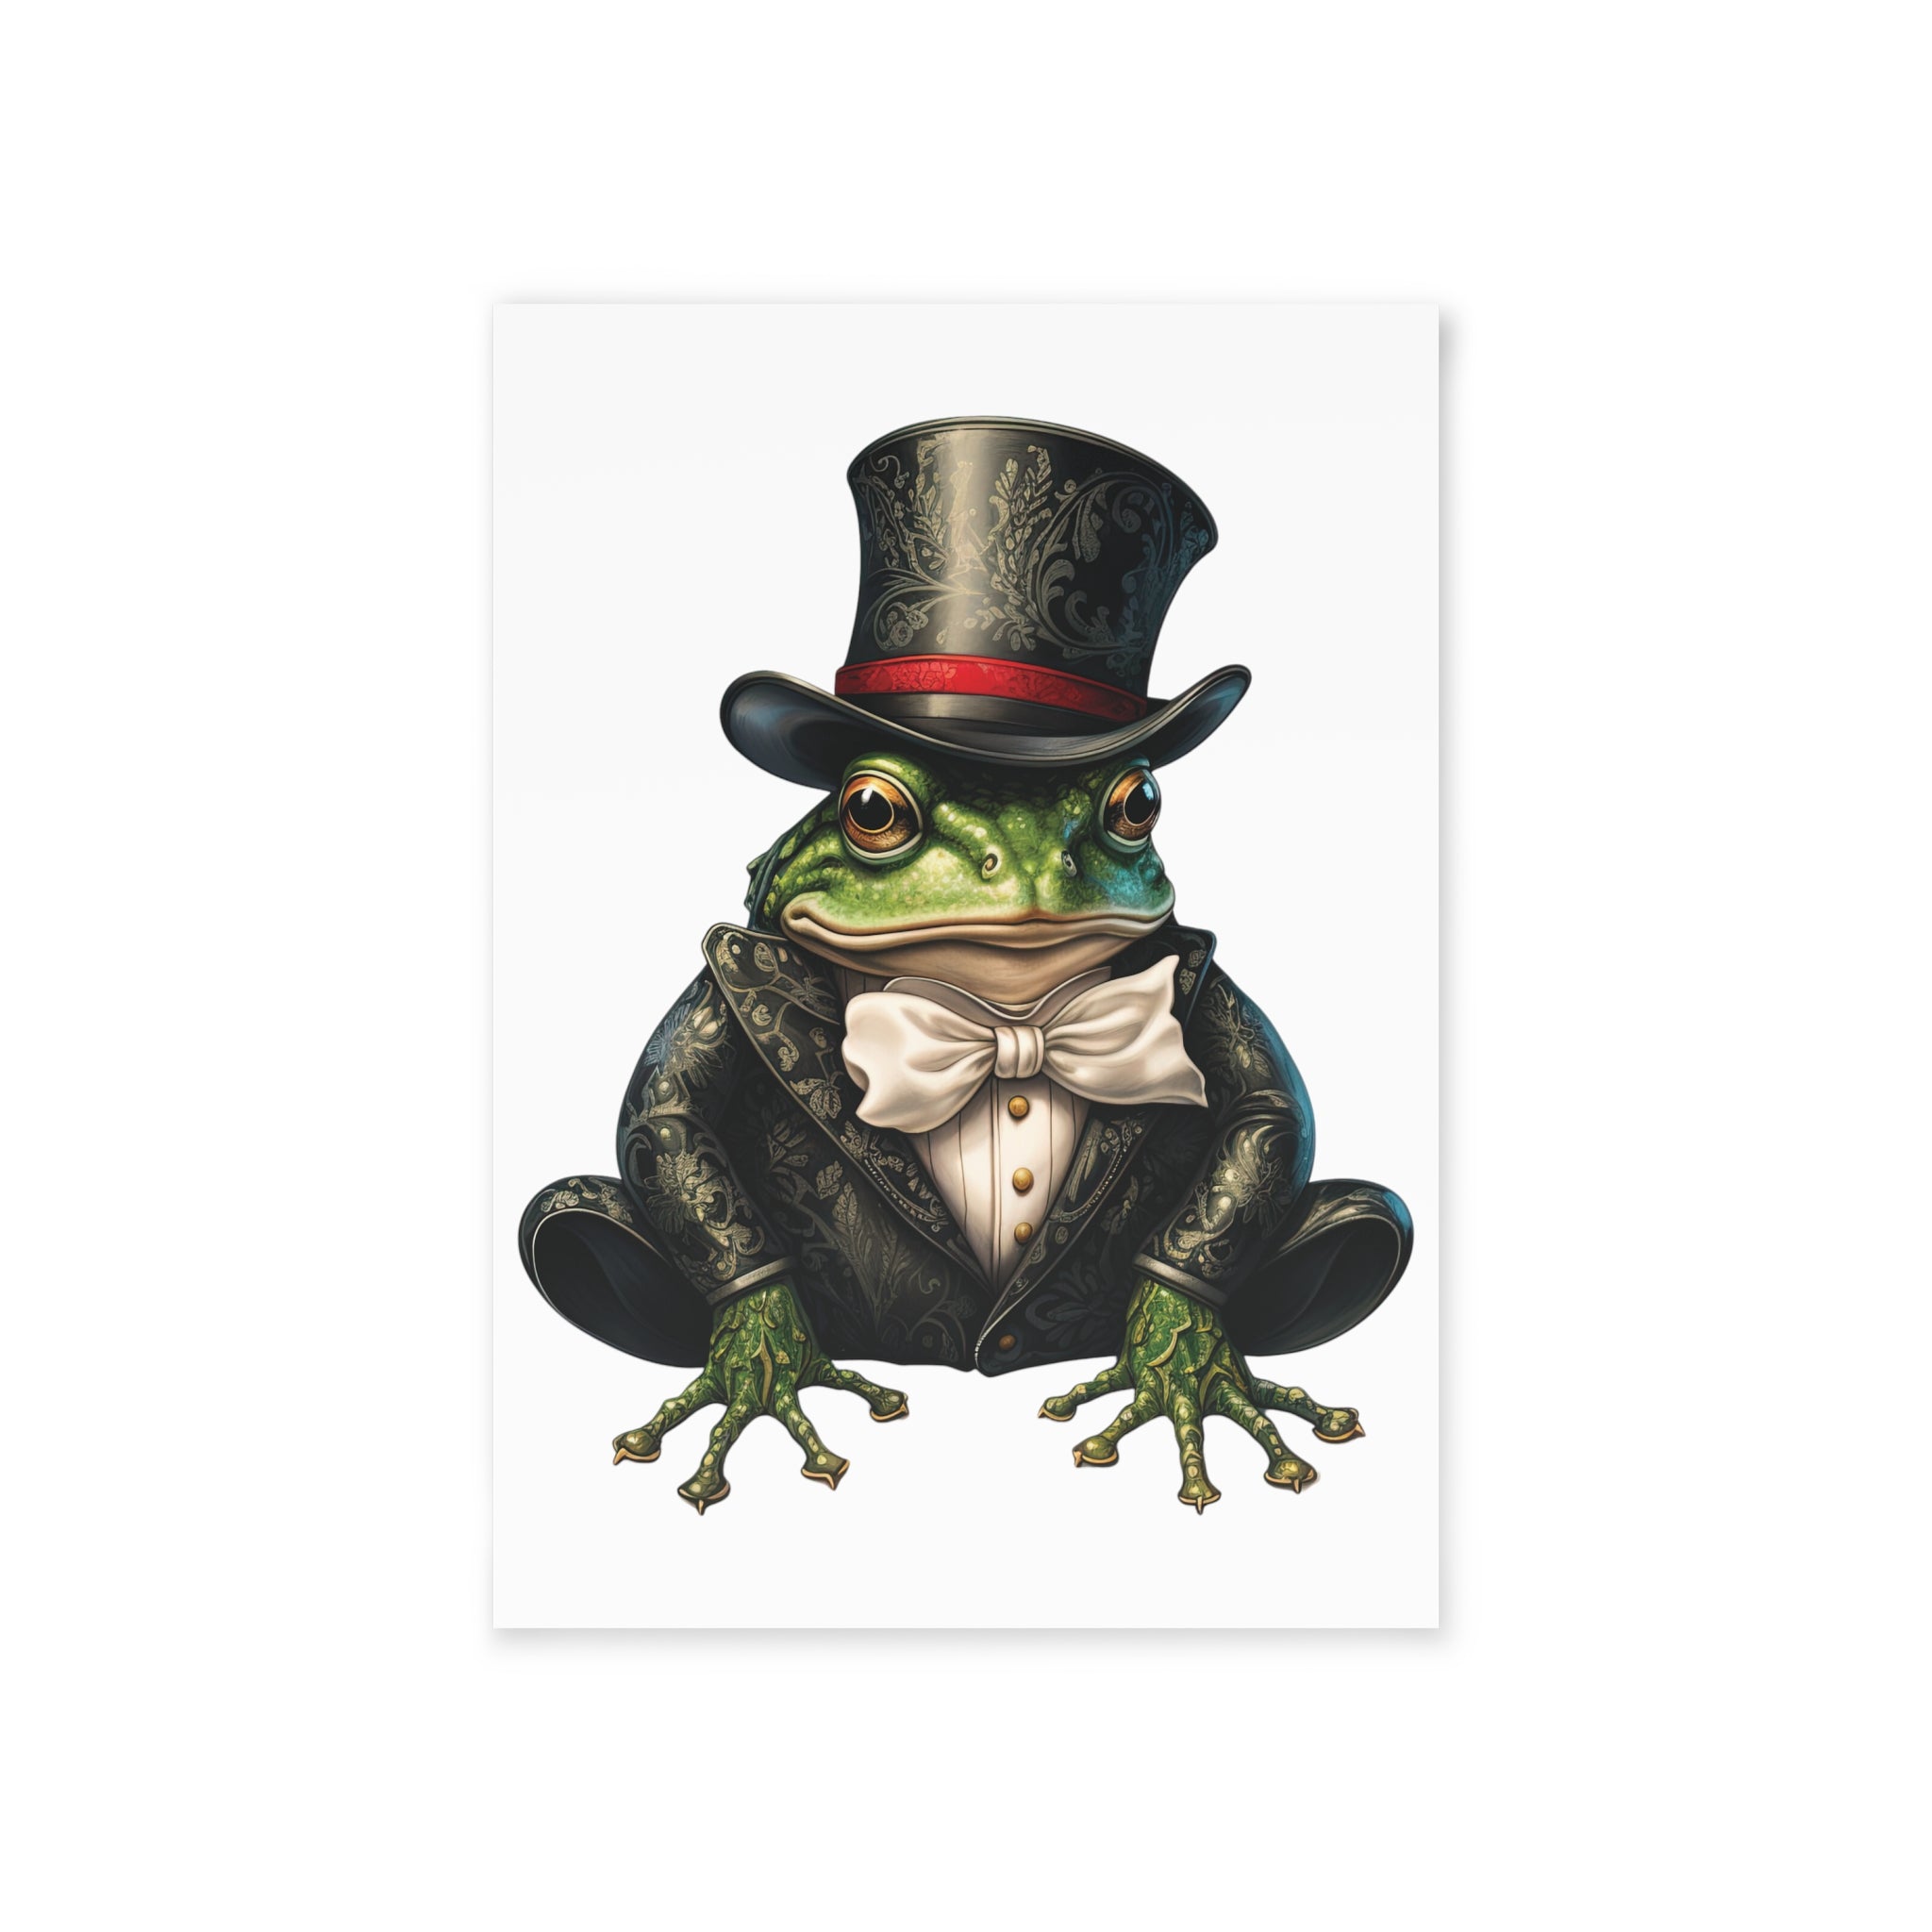 Frog Renaissance, Vintage Gothic - One-Sided Greeting Card/Art Print with Envelope, 300gsm FSC-Certified